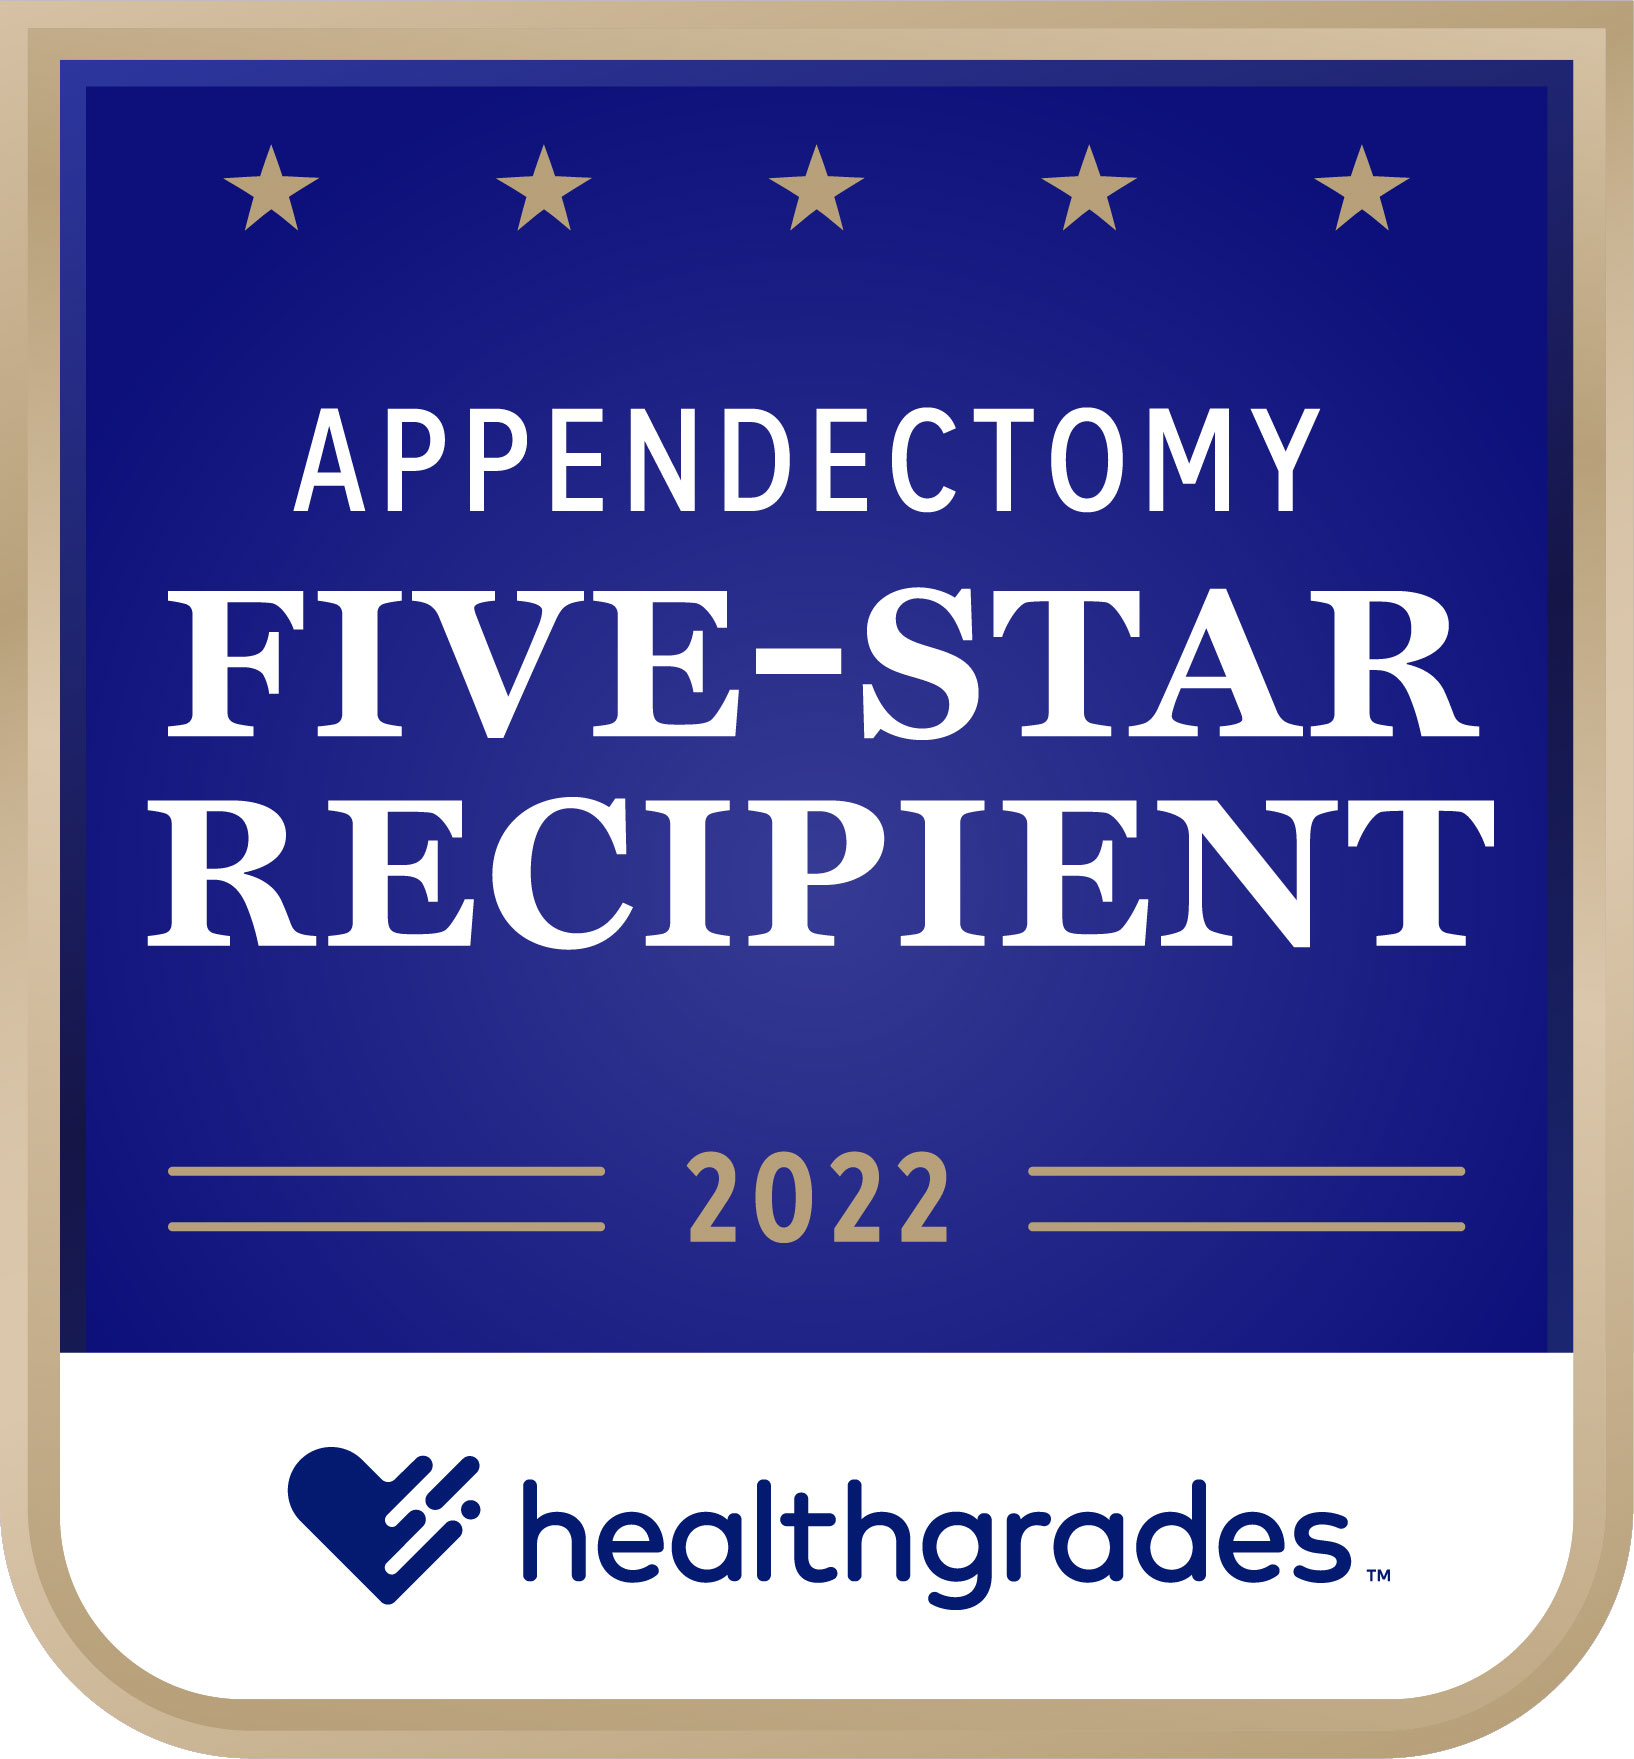 Five-Star_Appendectomy_2022